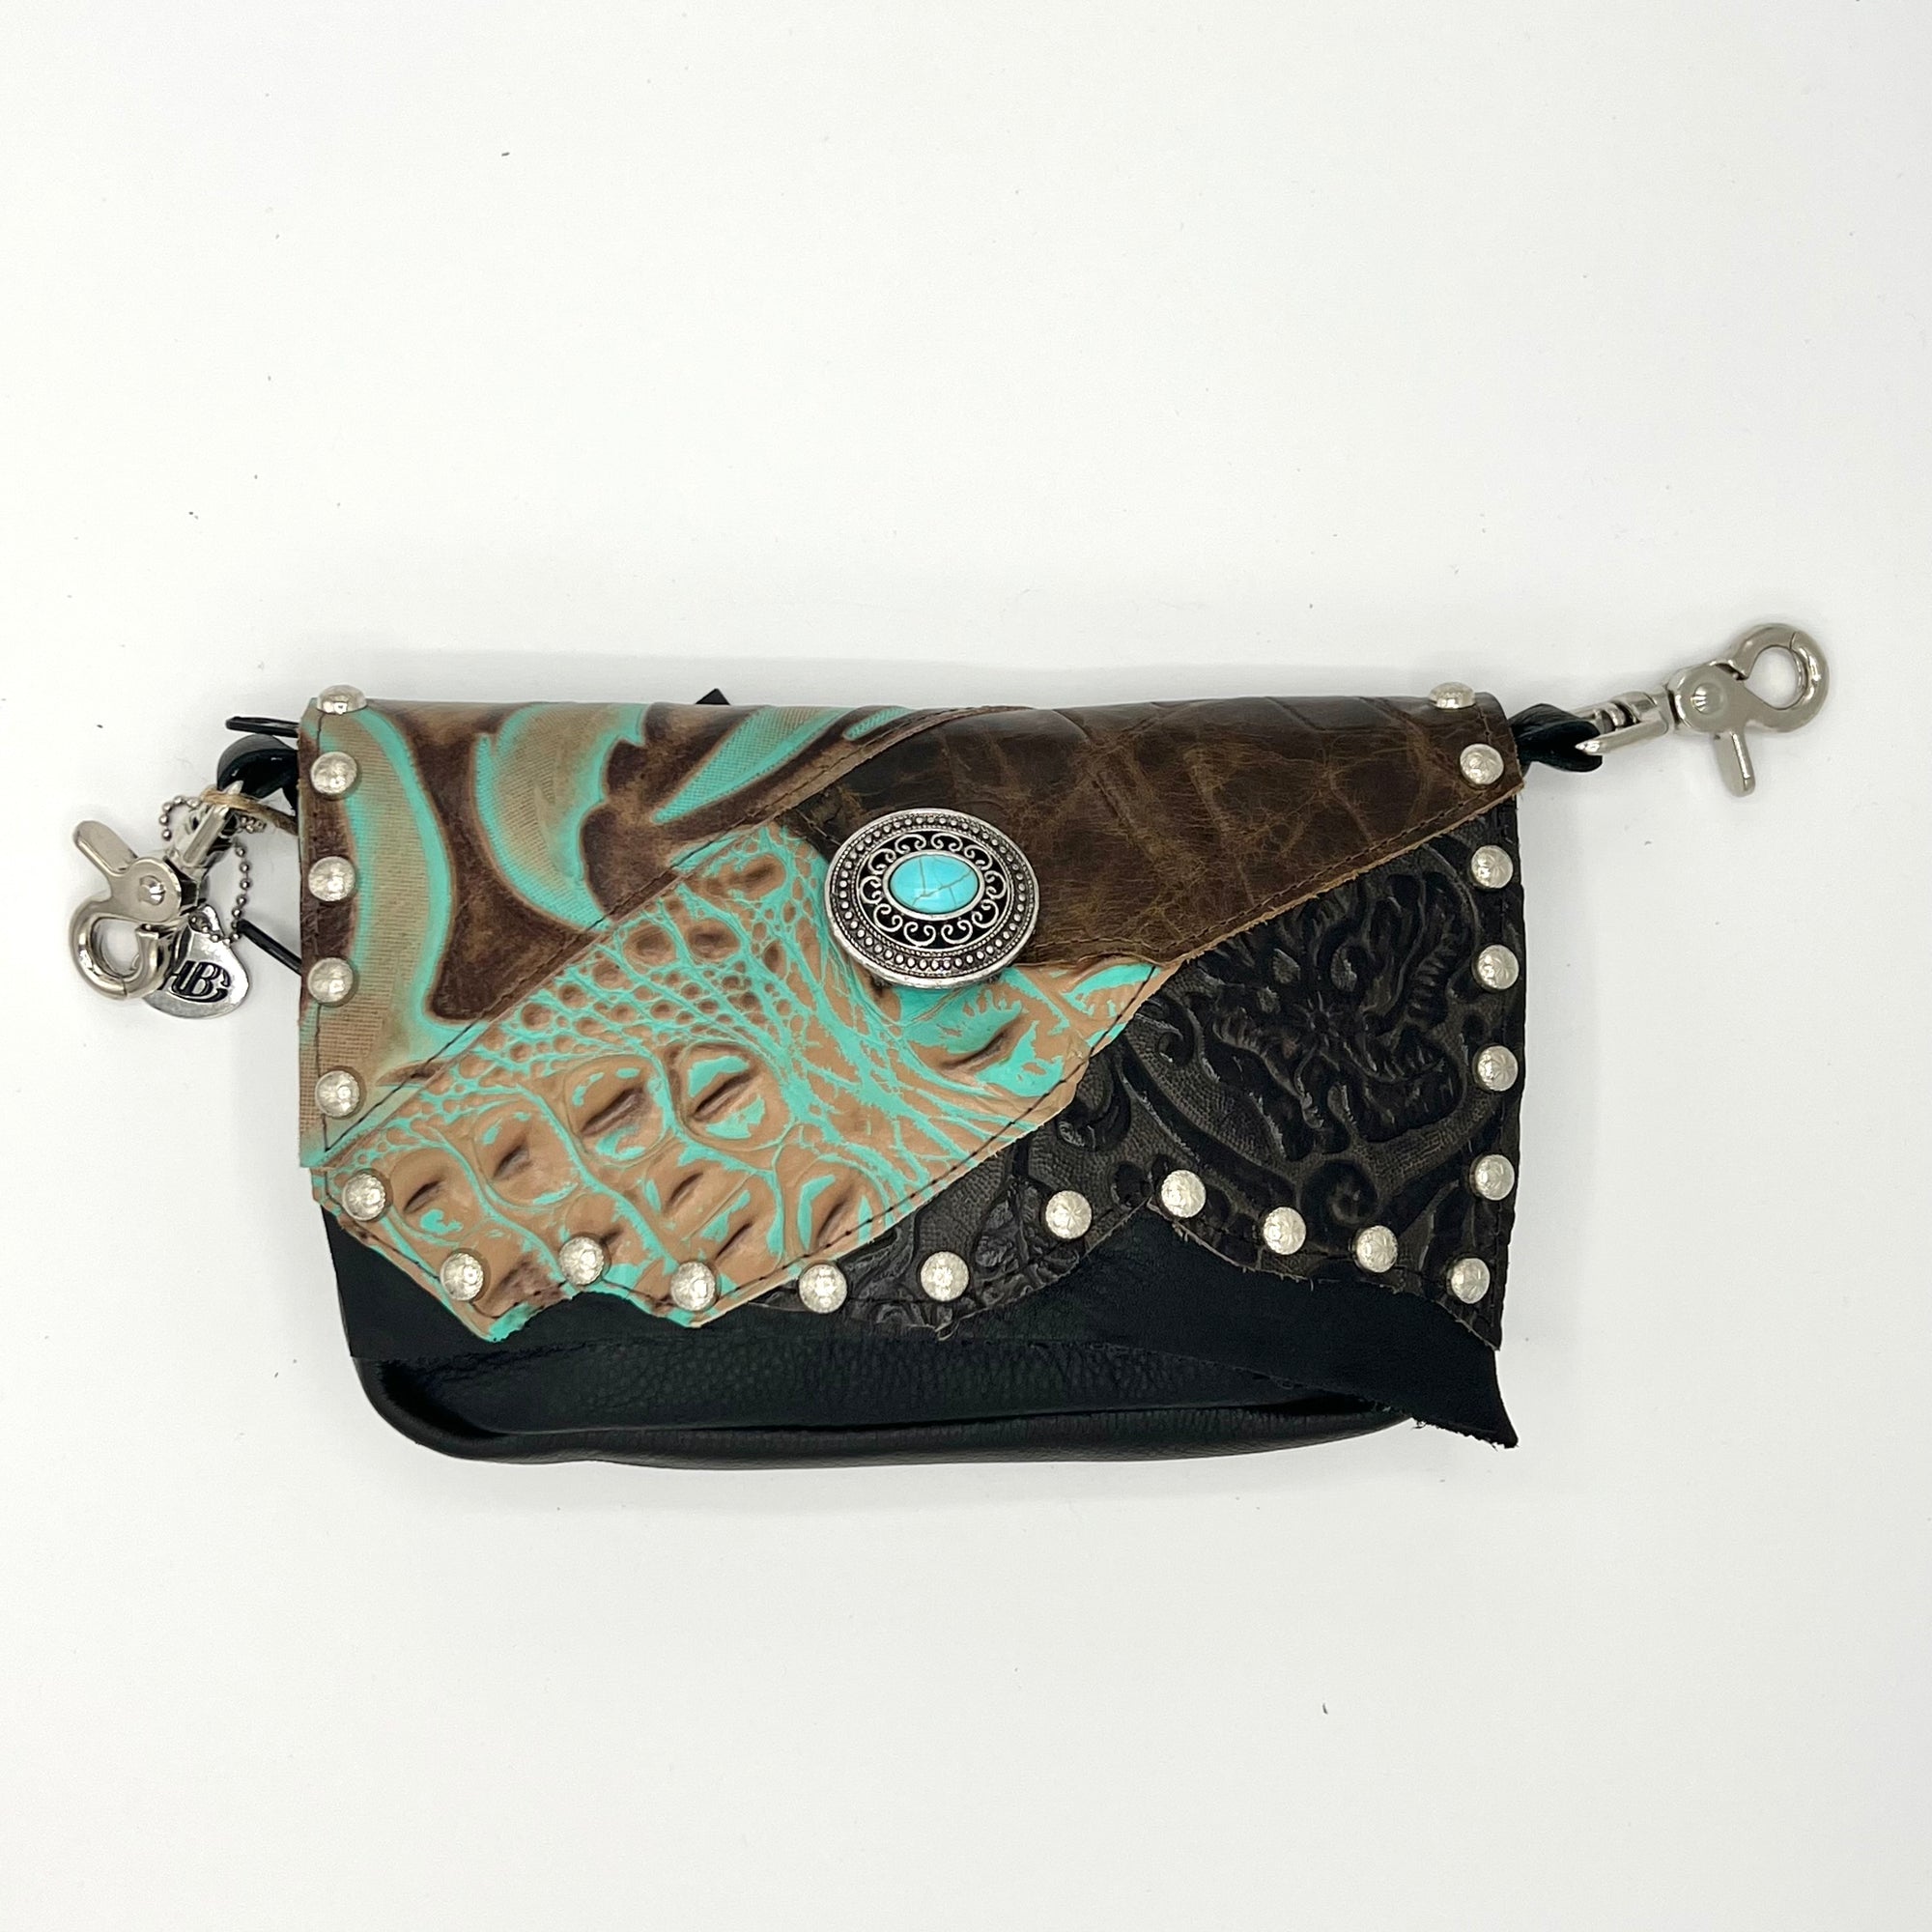 Turquoise Concealed Carry Hip Bag / Crossbody